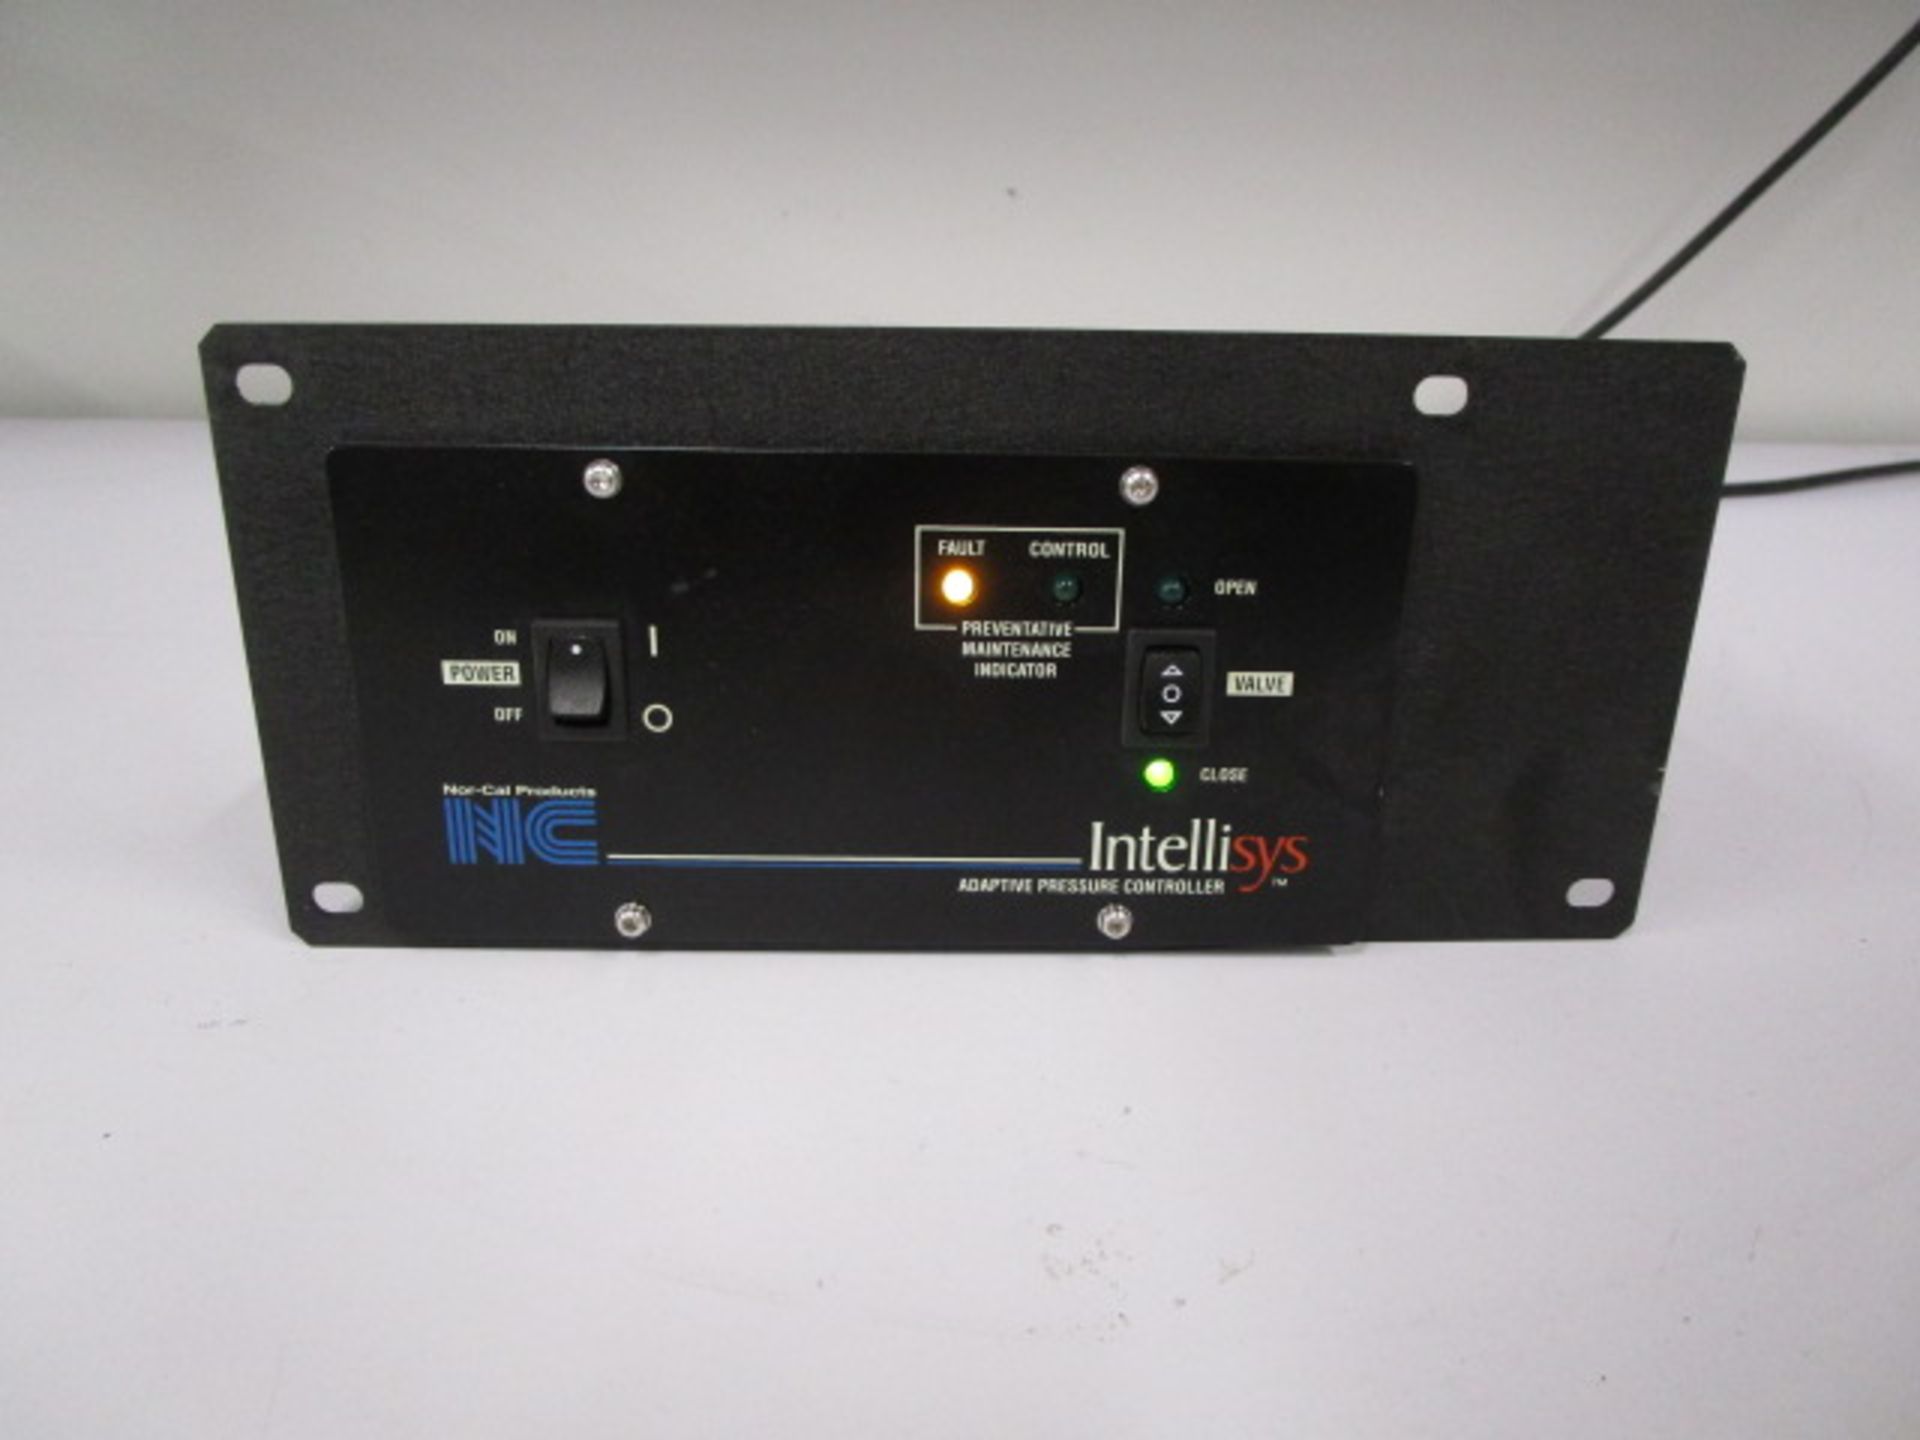 NC NOR-CAL PRODUCTS INTELLISYS ADAPTIVE PRESSURE CONTROLLER